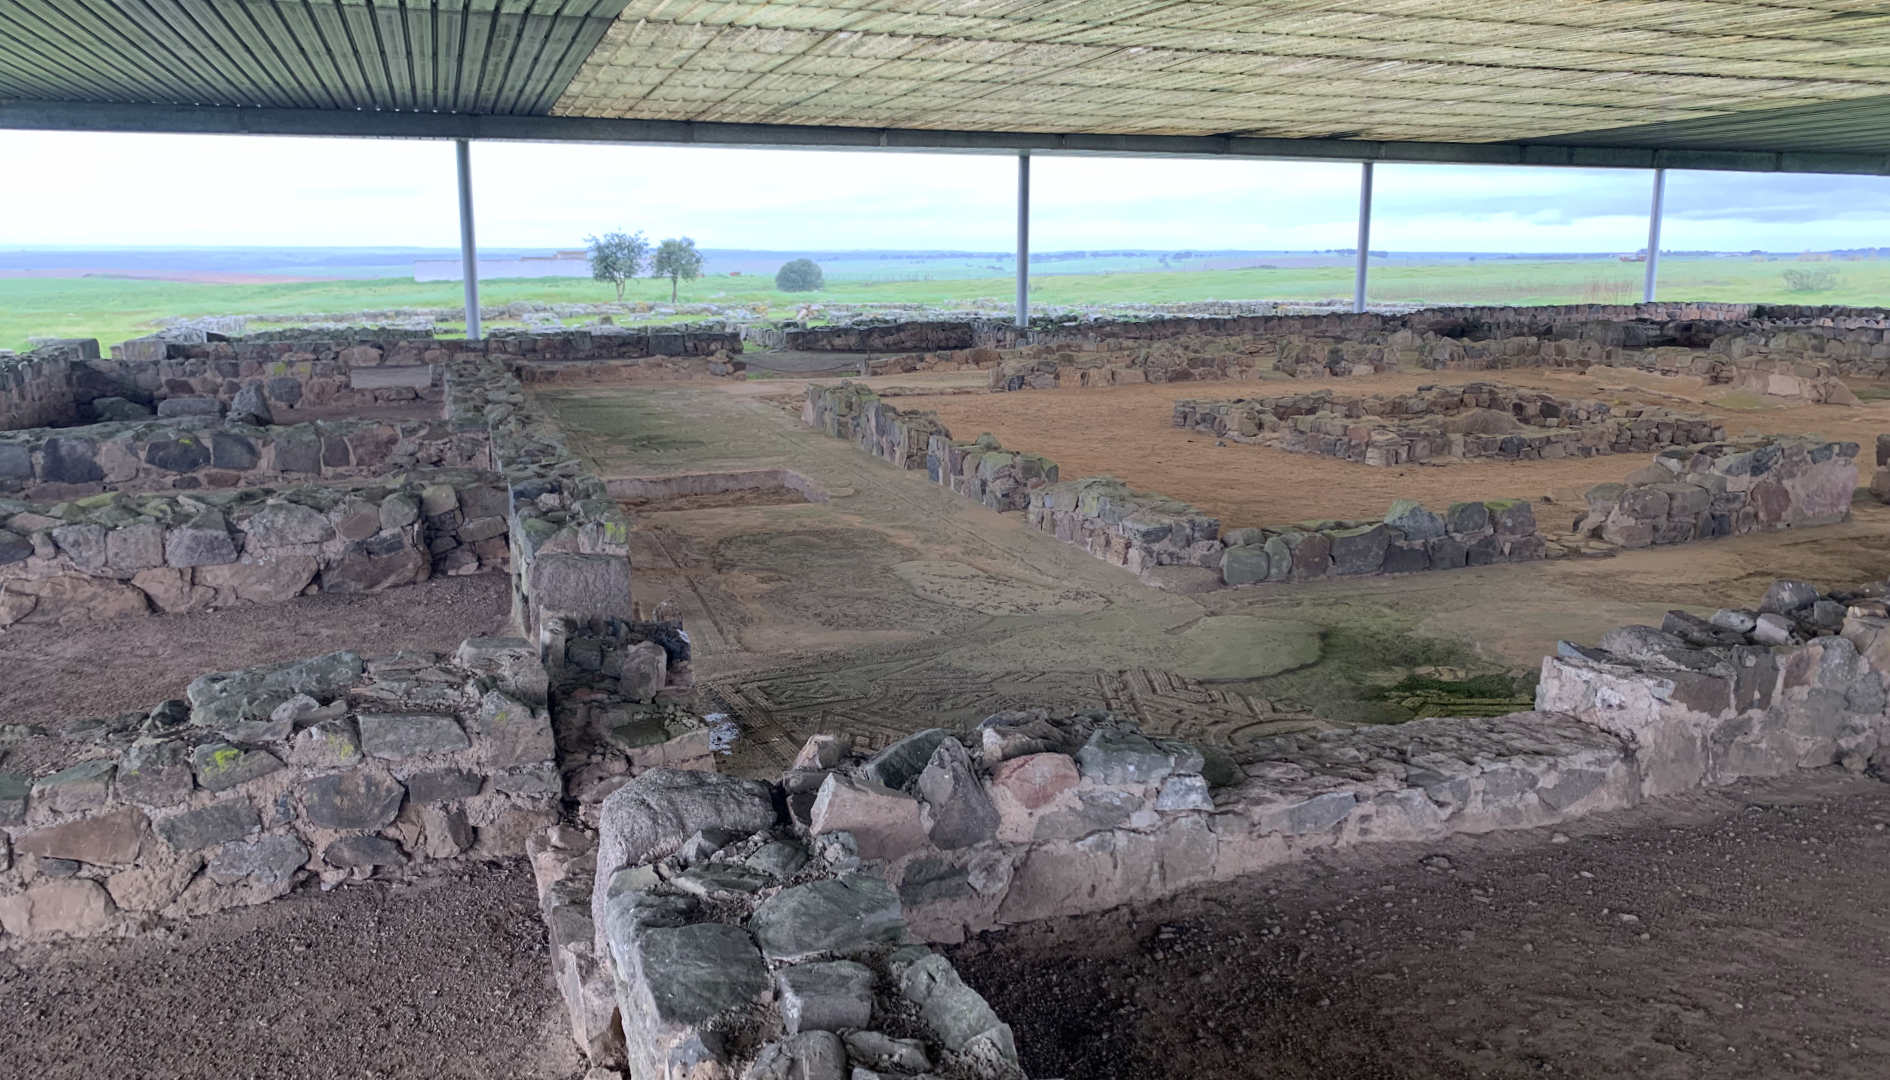 The thousands of years old mosaic floor and ruins of an ancient Roman settlement.